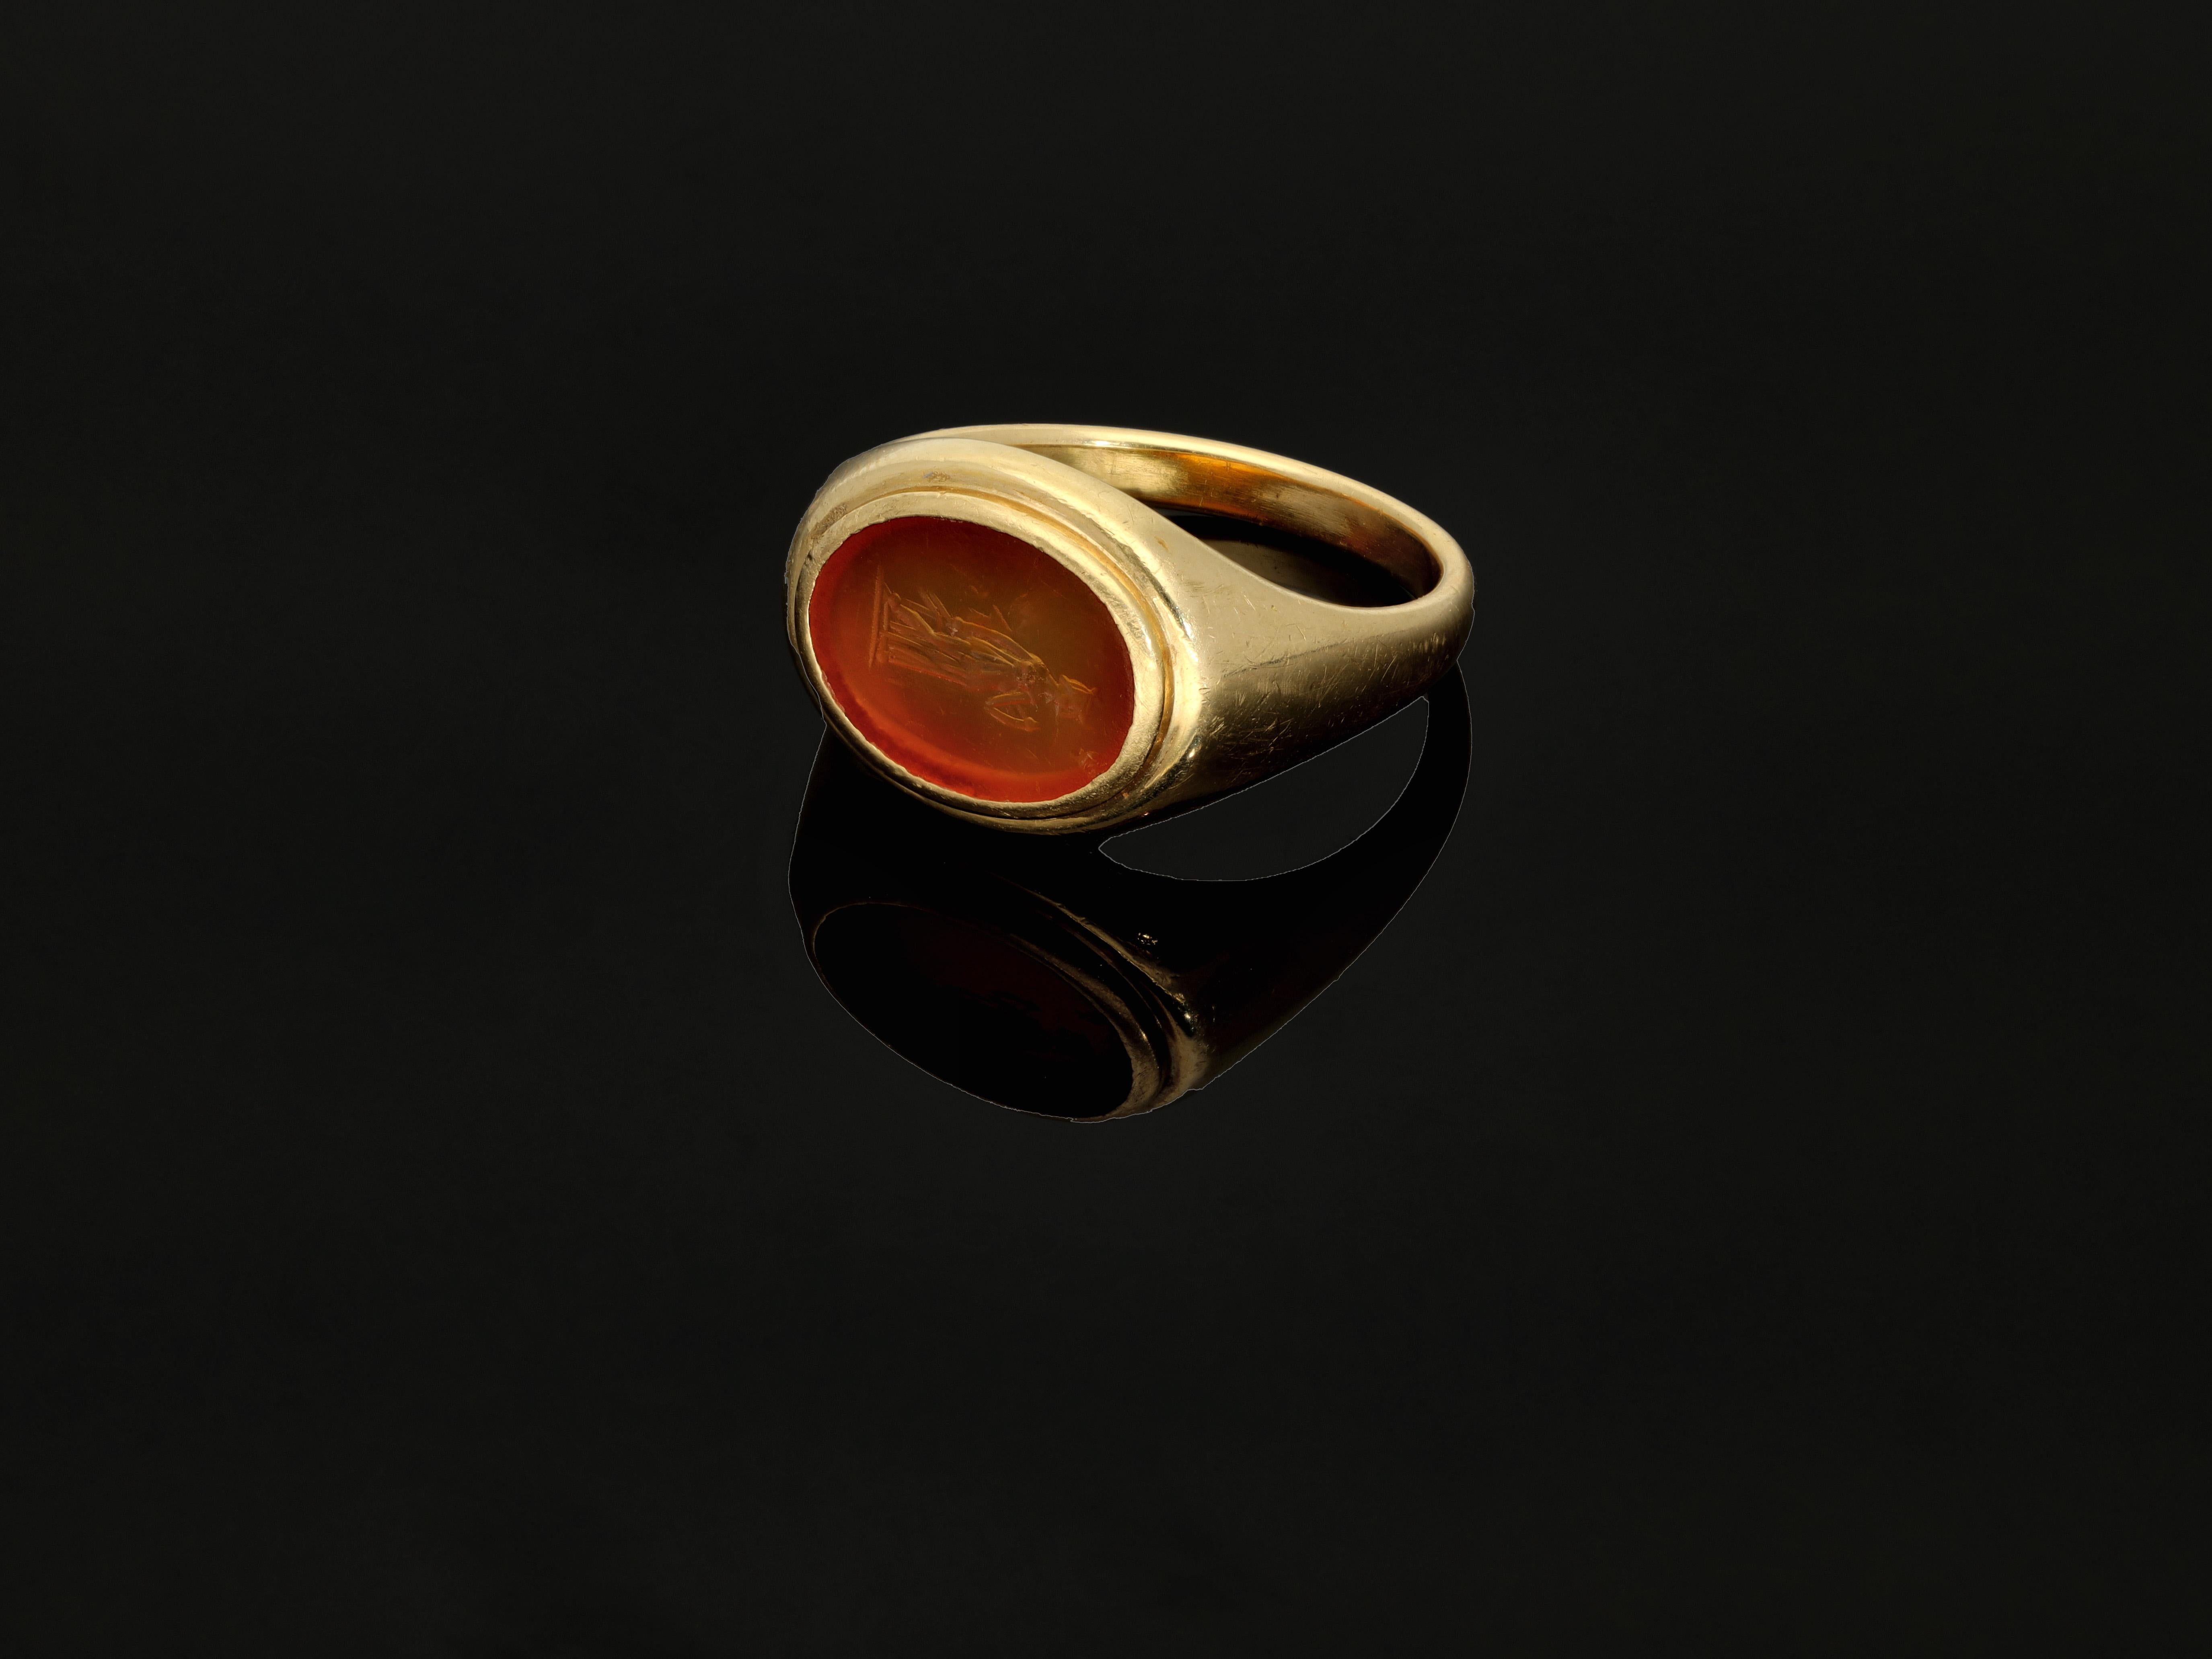 Oval Cut Antique Unisex Carnelian Intaglio Signet Ring, 18k Gold Large Agate Seal Ring For Sale